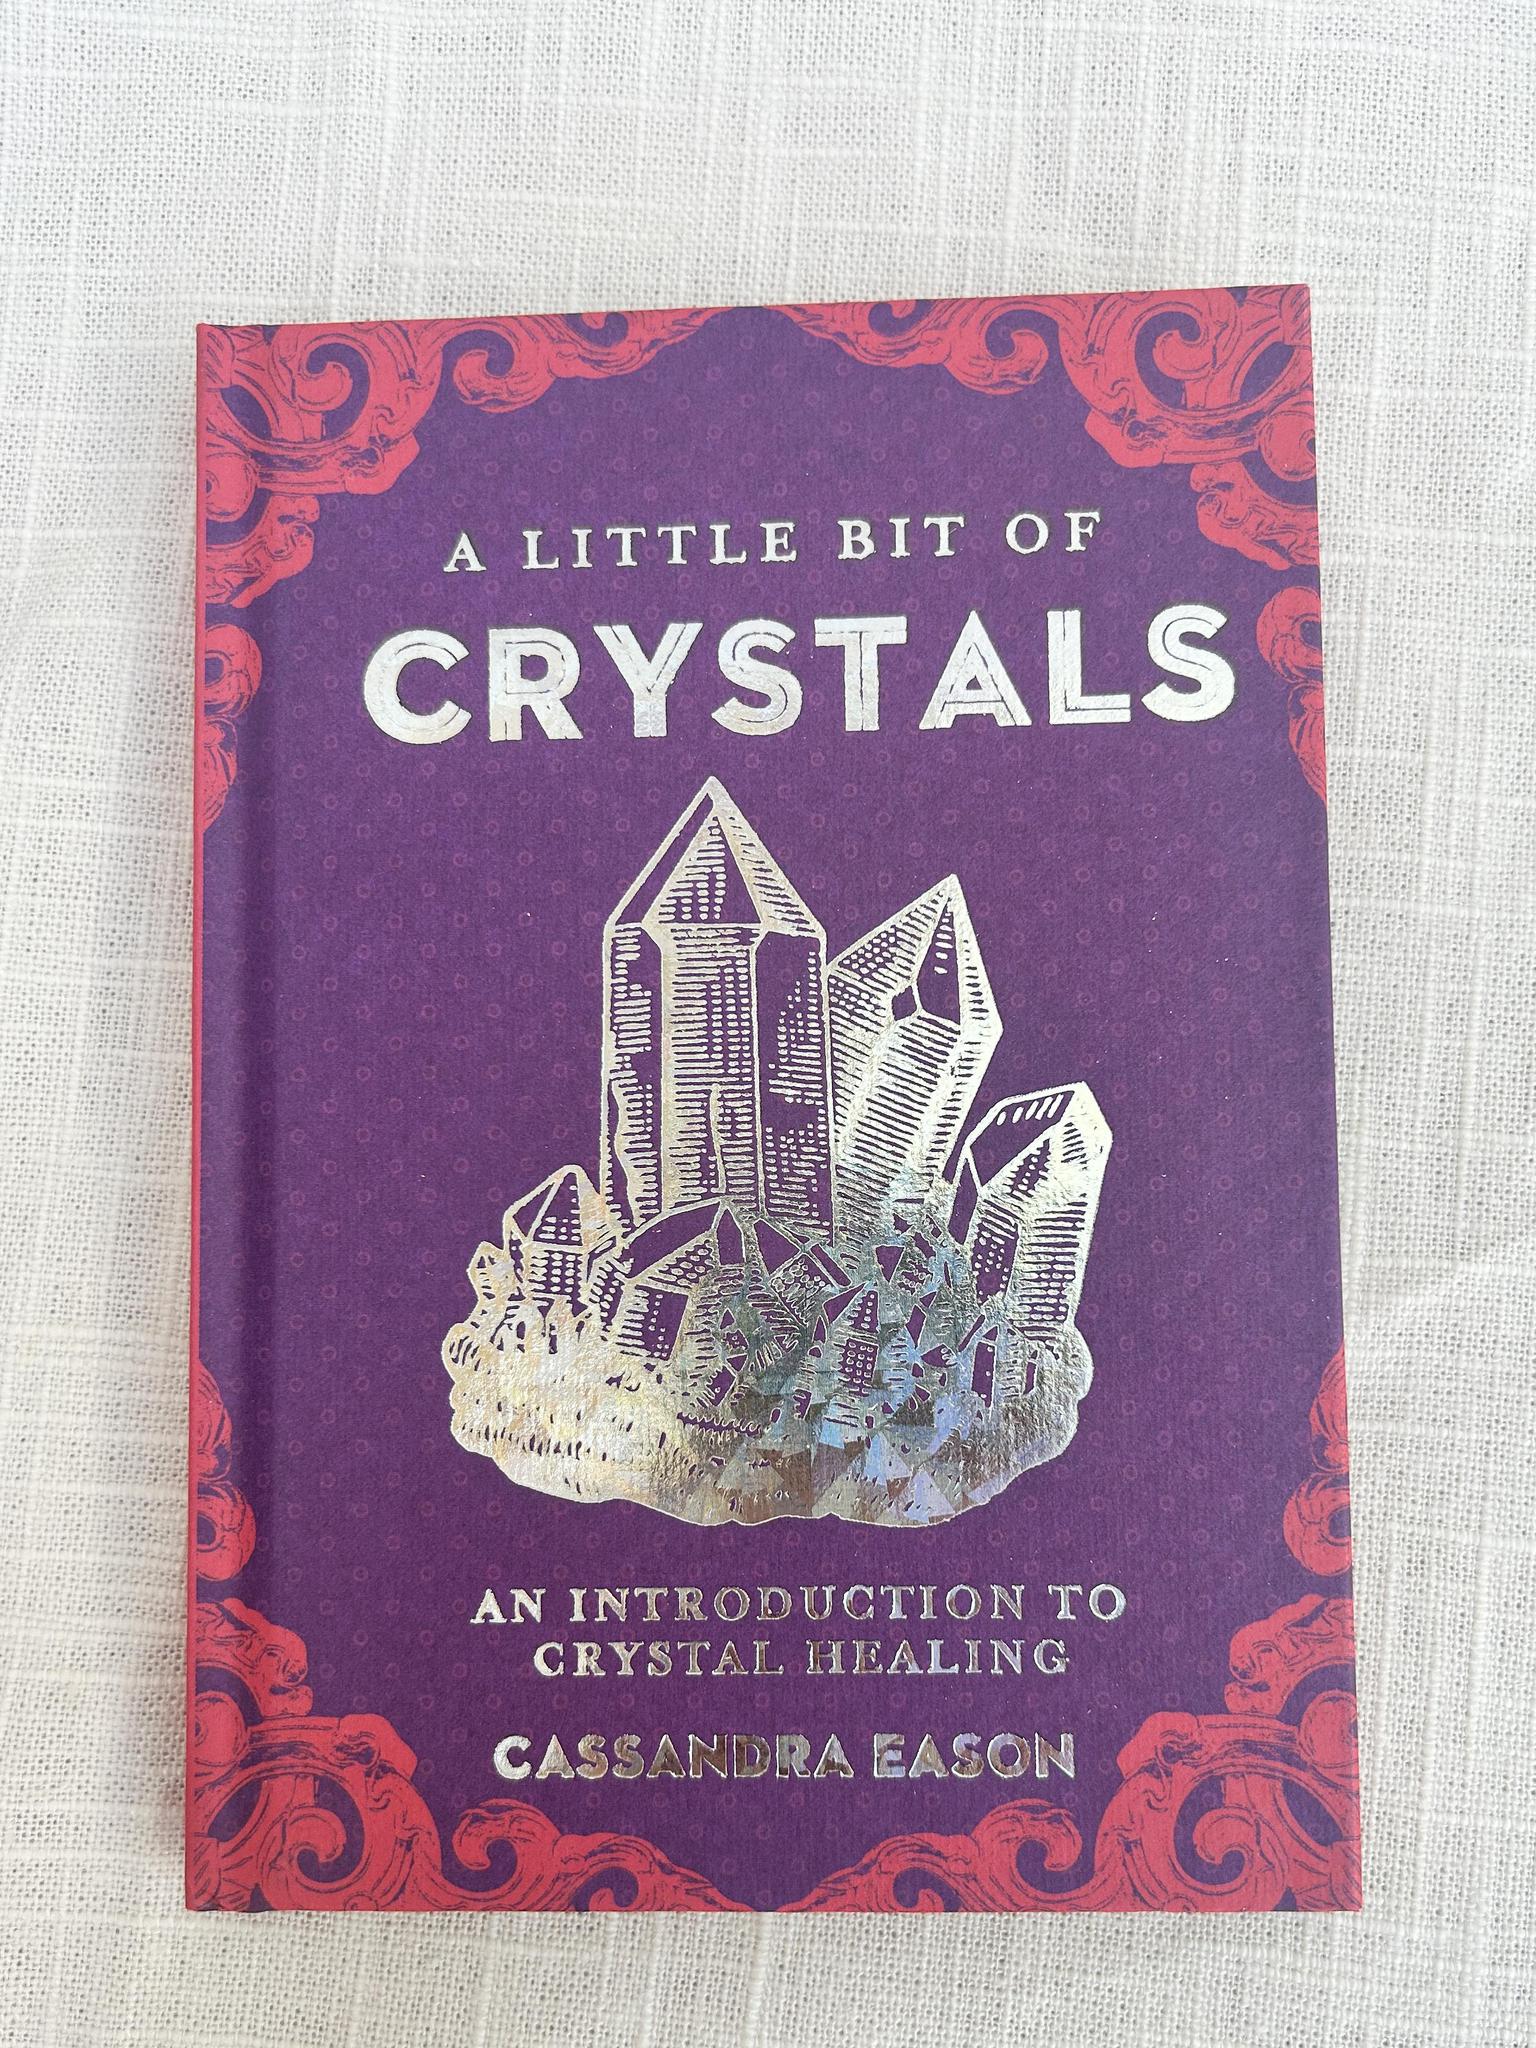 A Little Bit of Crystals book: an introduction to crystal healing